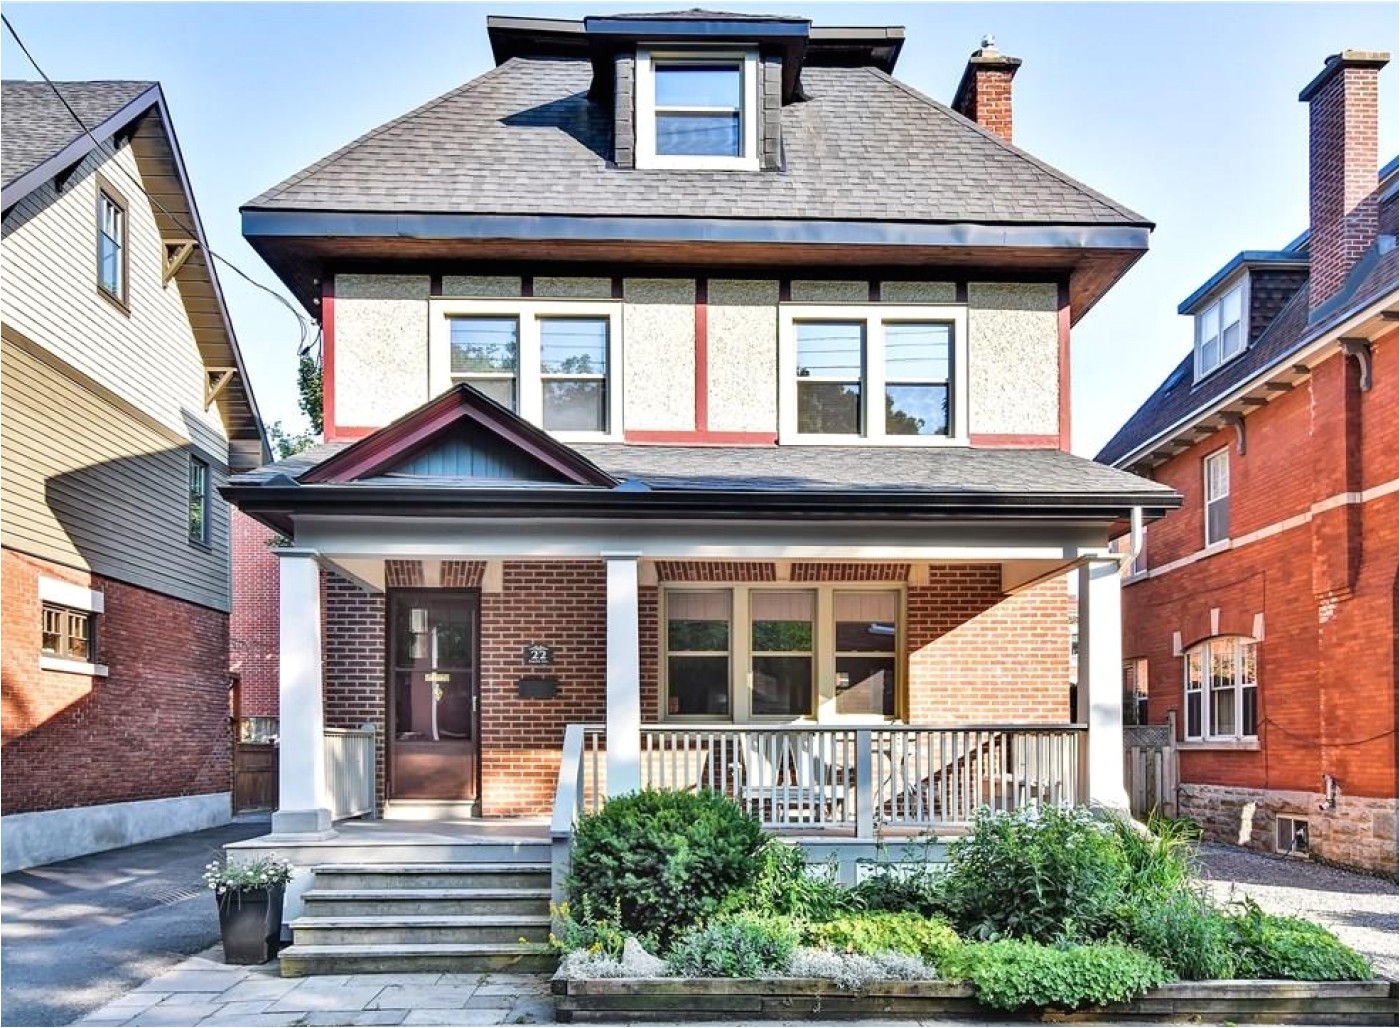 spacious tudor style home with charming veranda on a popular street in old ottawa south main floor features kitchen with lots of storage granite counters